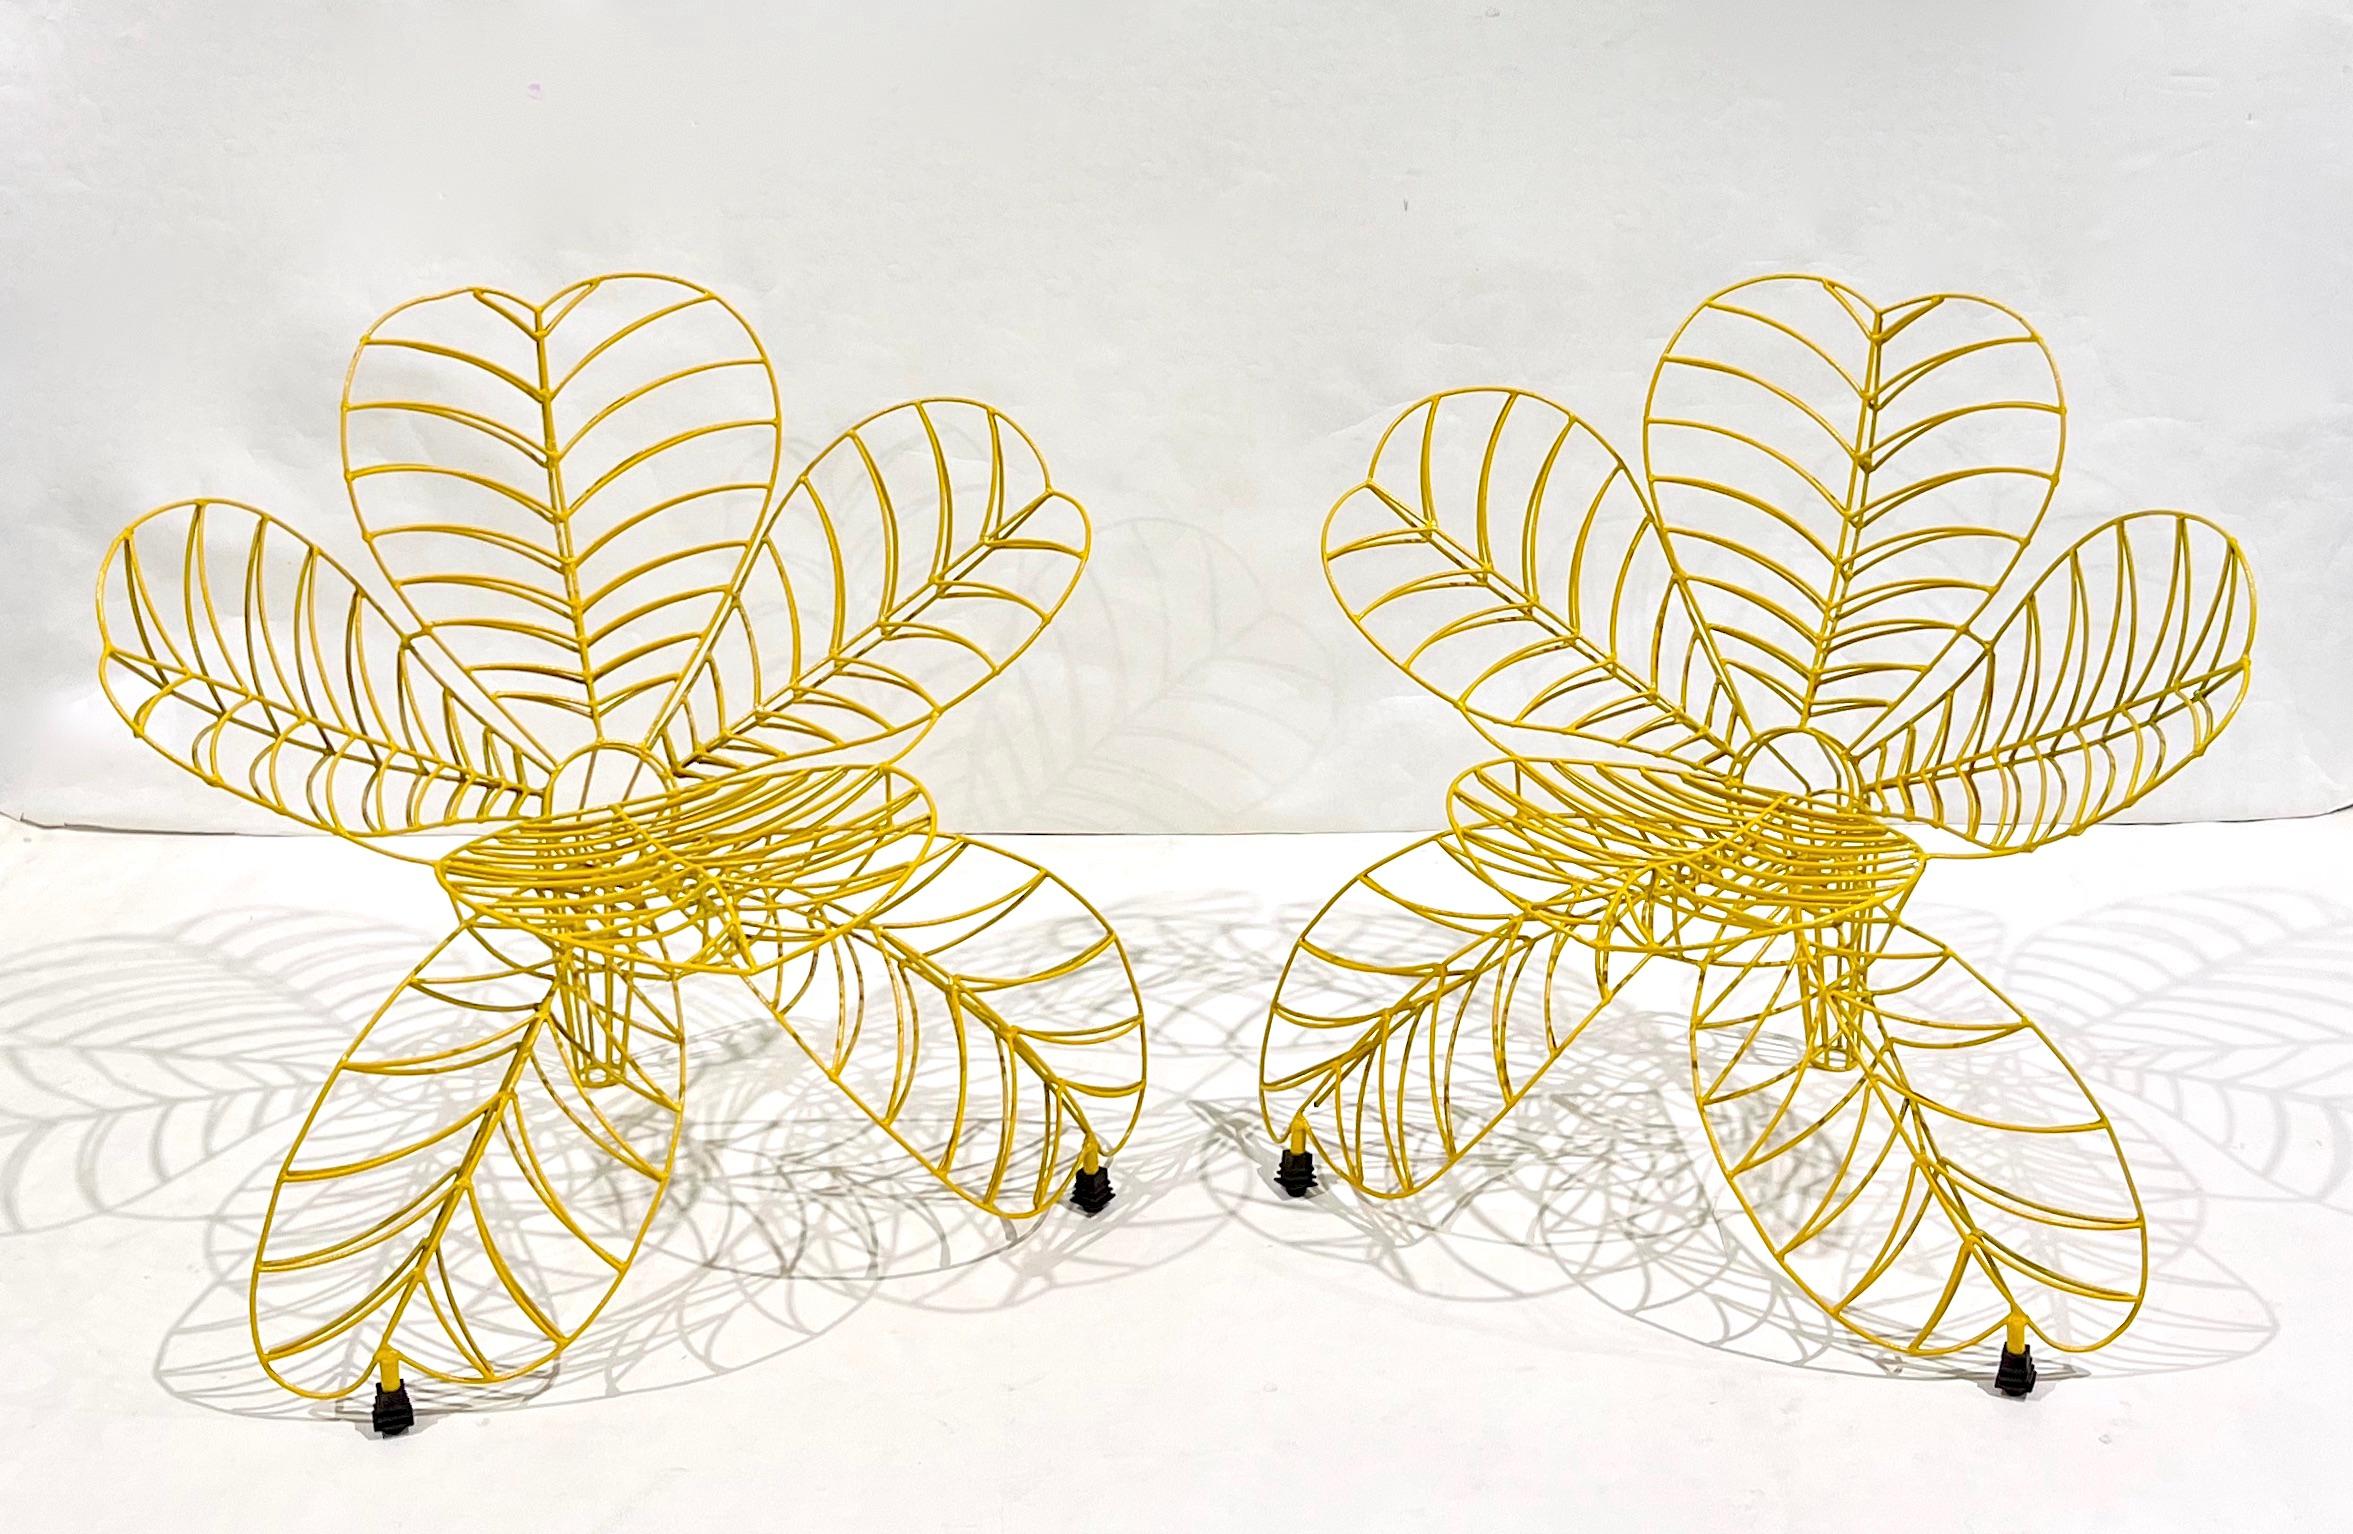 This fun pair of armchairs is a unique organic modern design manufactured and signed by the Italian artist, Anacleto Spazzapan (Luino, Italy - 1943). The handmade structure is created with hand-welded thin iron tubes, cold painted in lemon yellow.